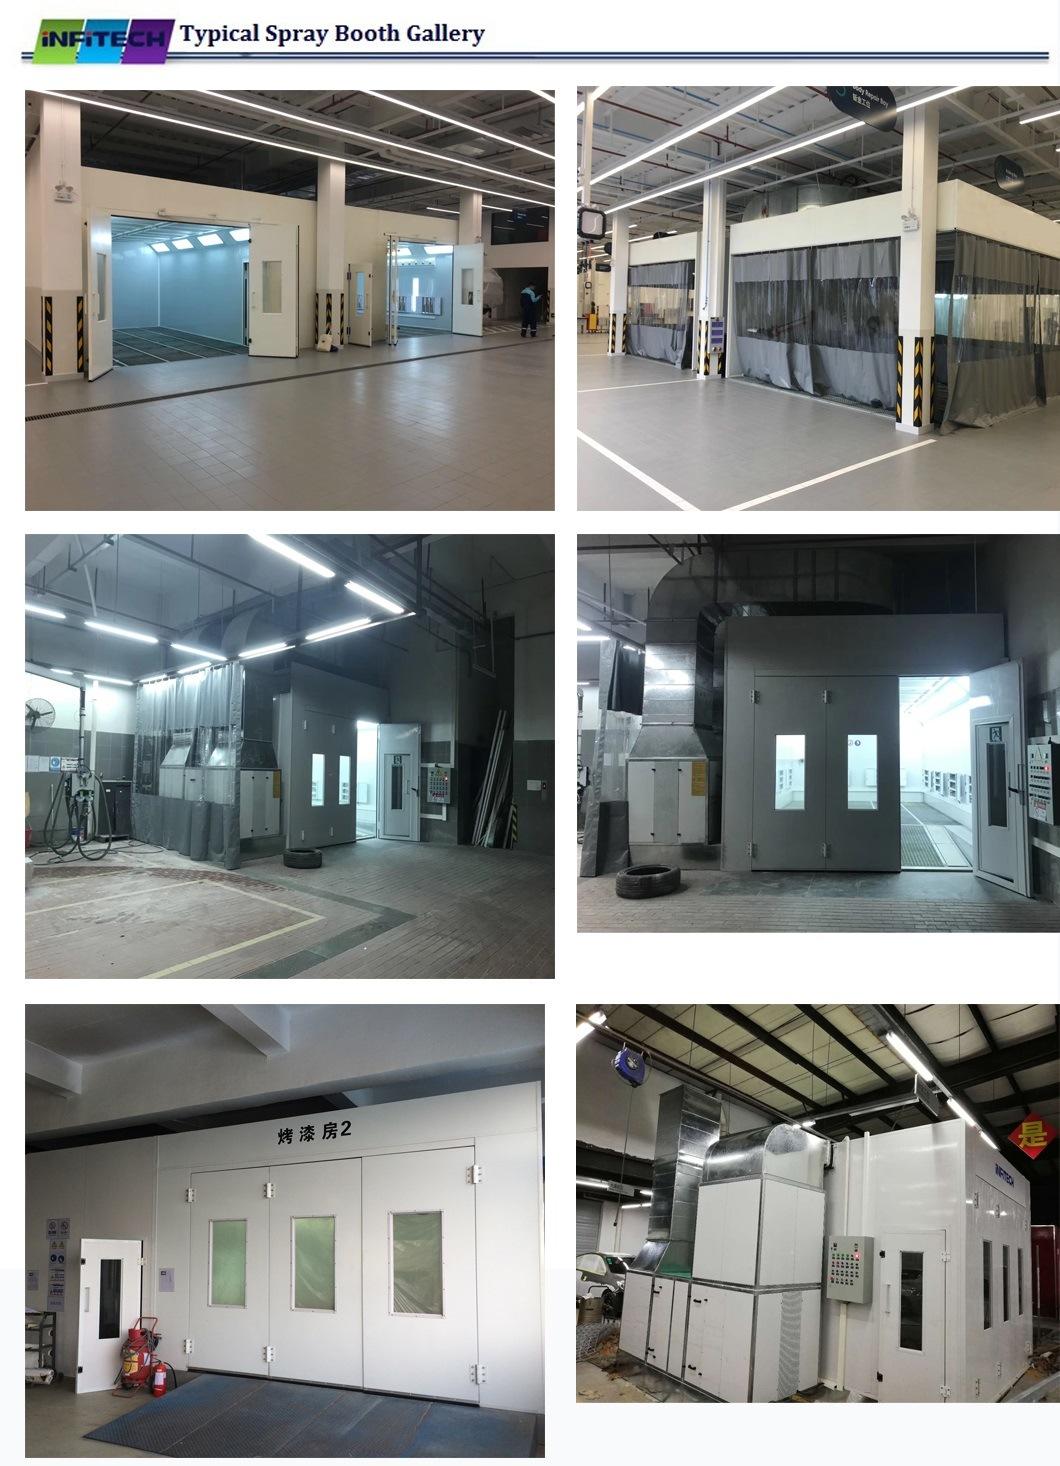 China Supplier Spray and Bake Booth Downdraught Airflow